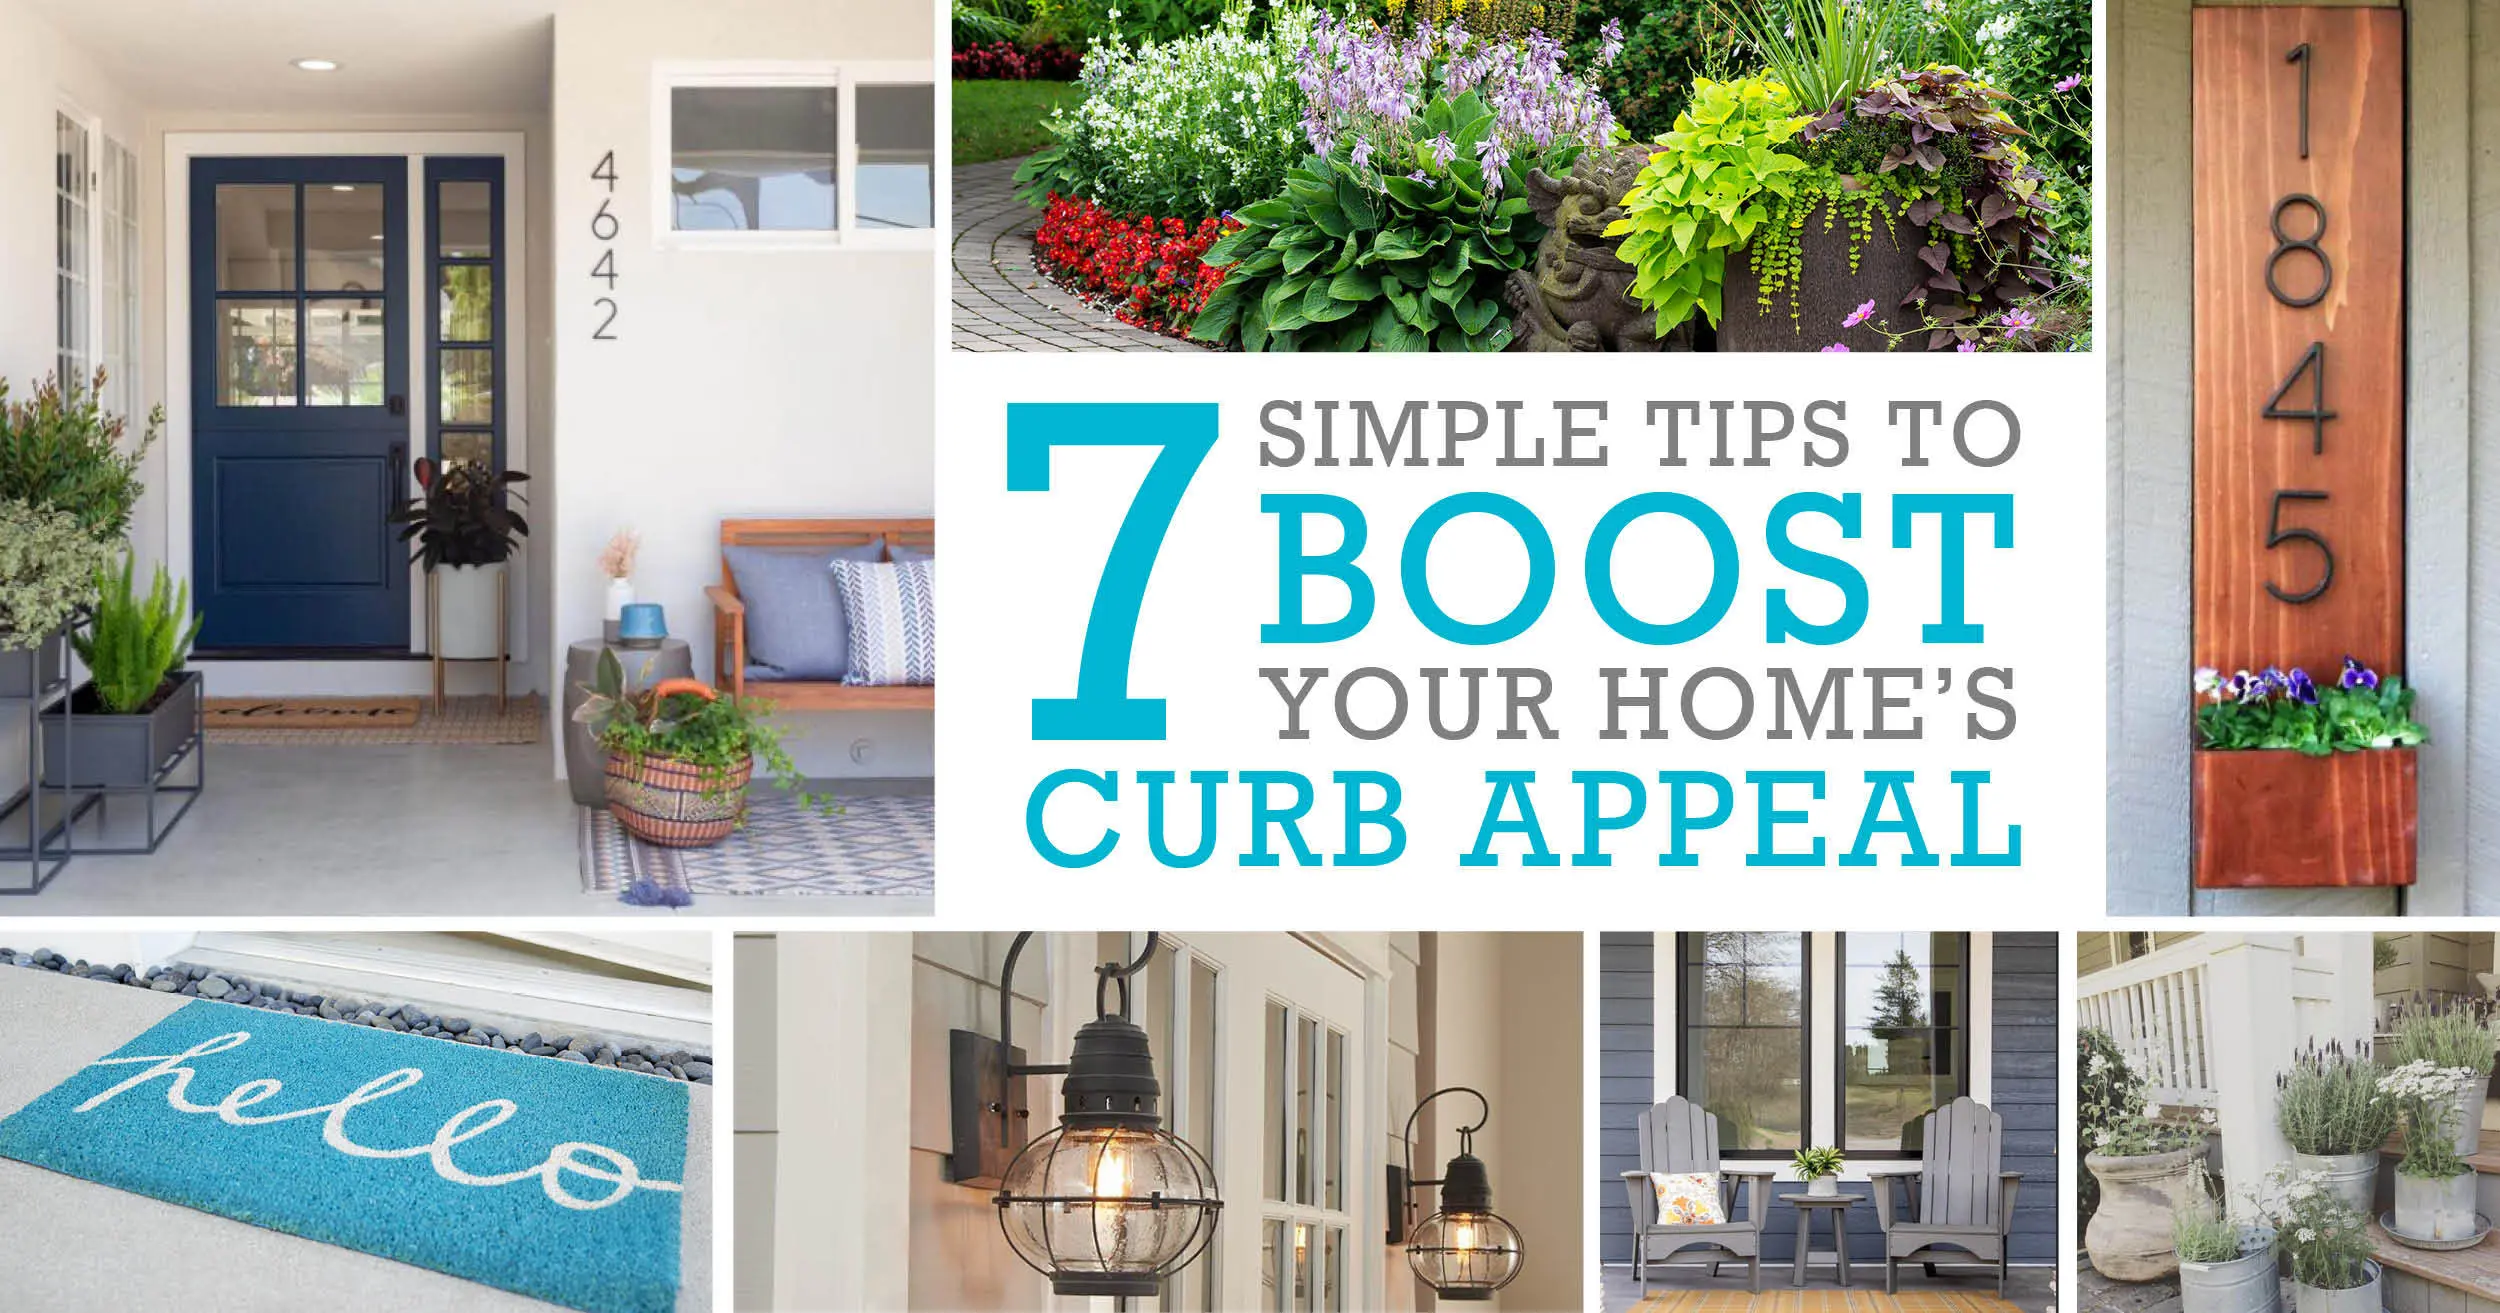 7 Simple Tips To Boost Your Home's Curb Appeal